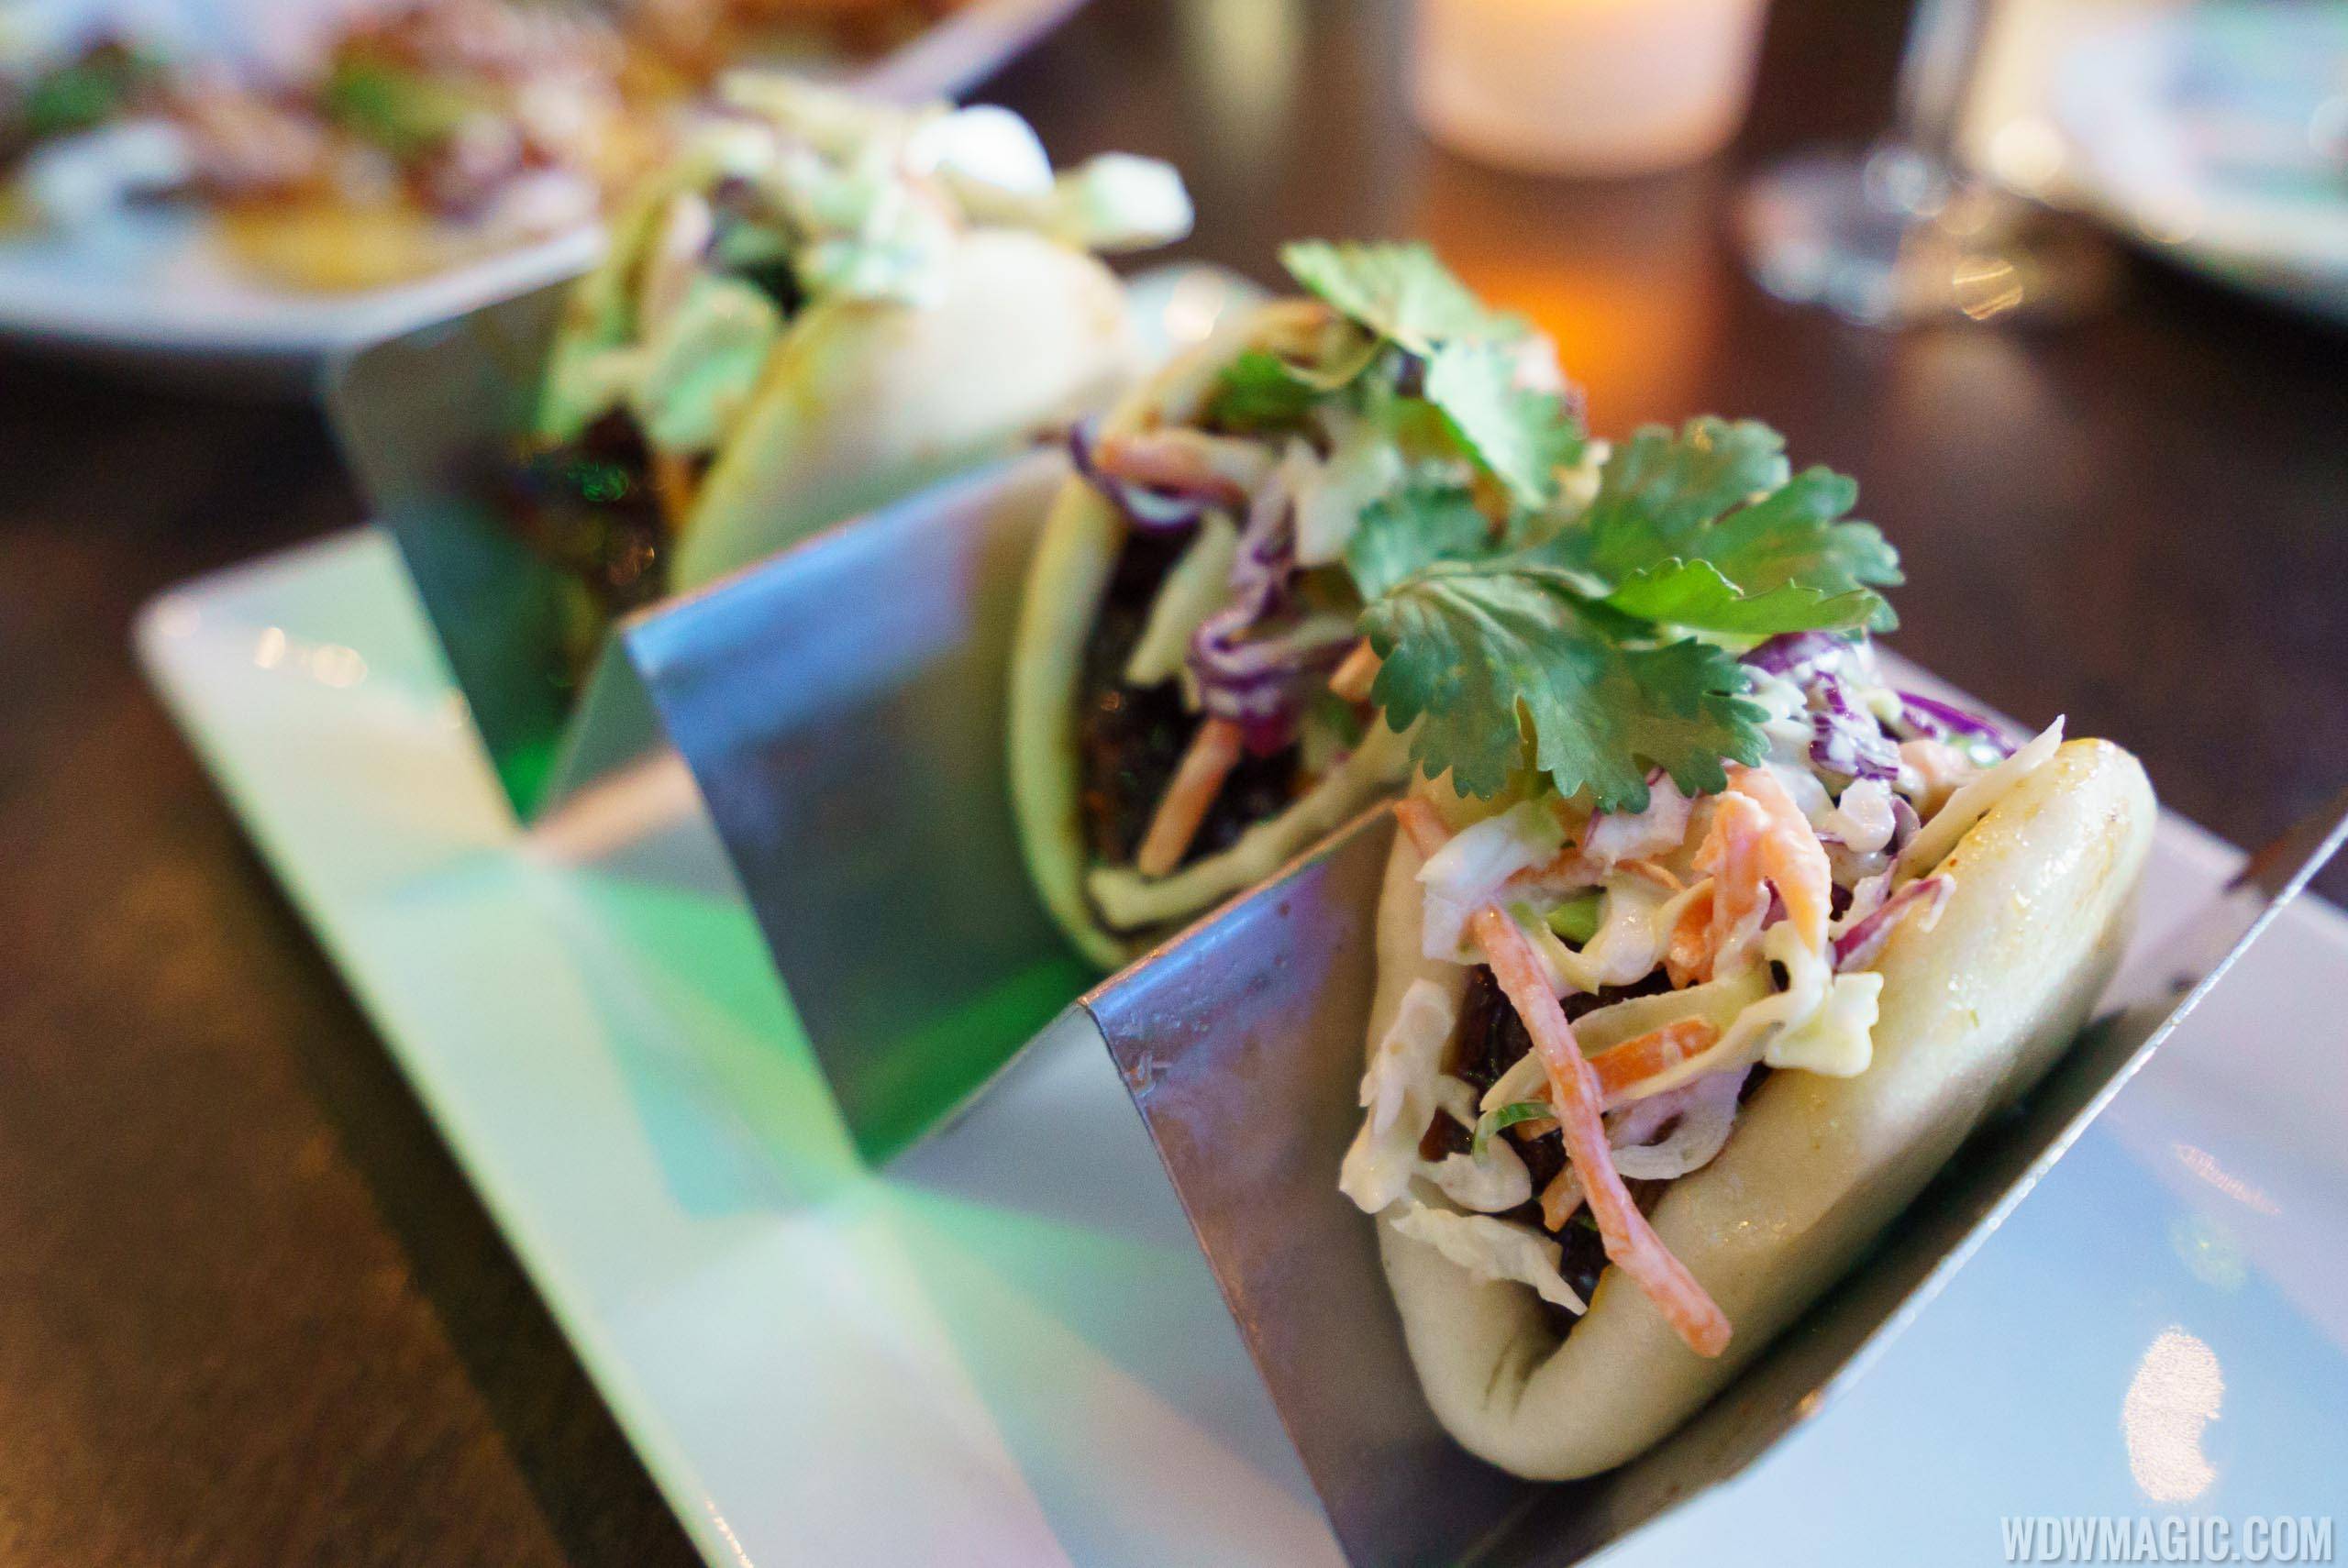 Chinese BBQ Pork - $13.99 Soft, steamed buns filled with Chinese BBQ pork, slaw & spicy Sriracha sauce